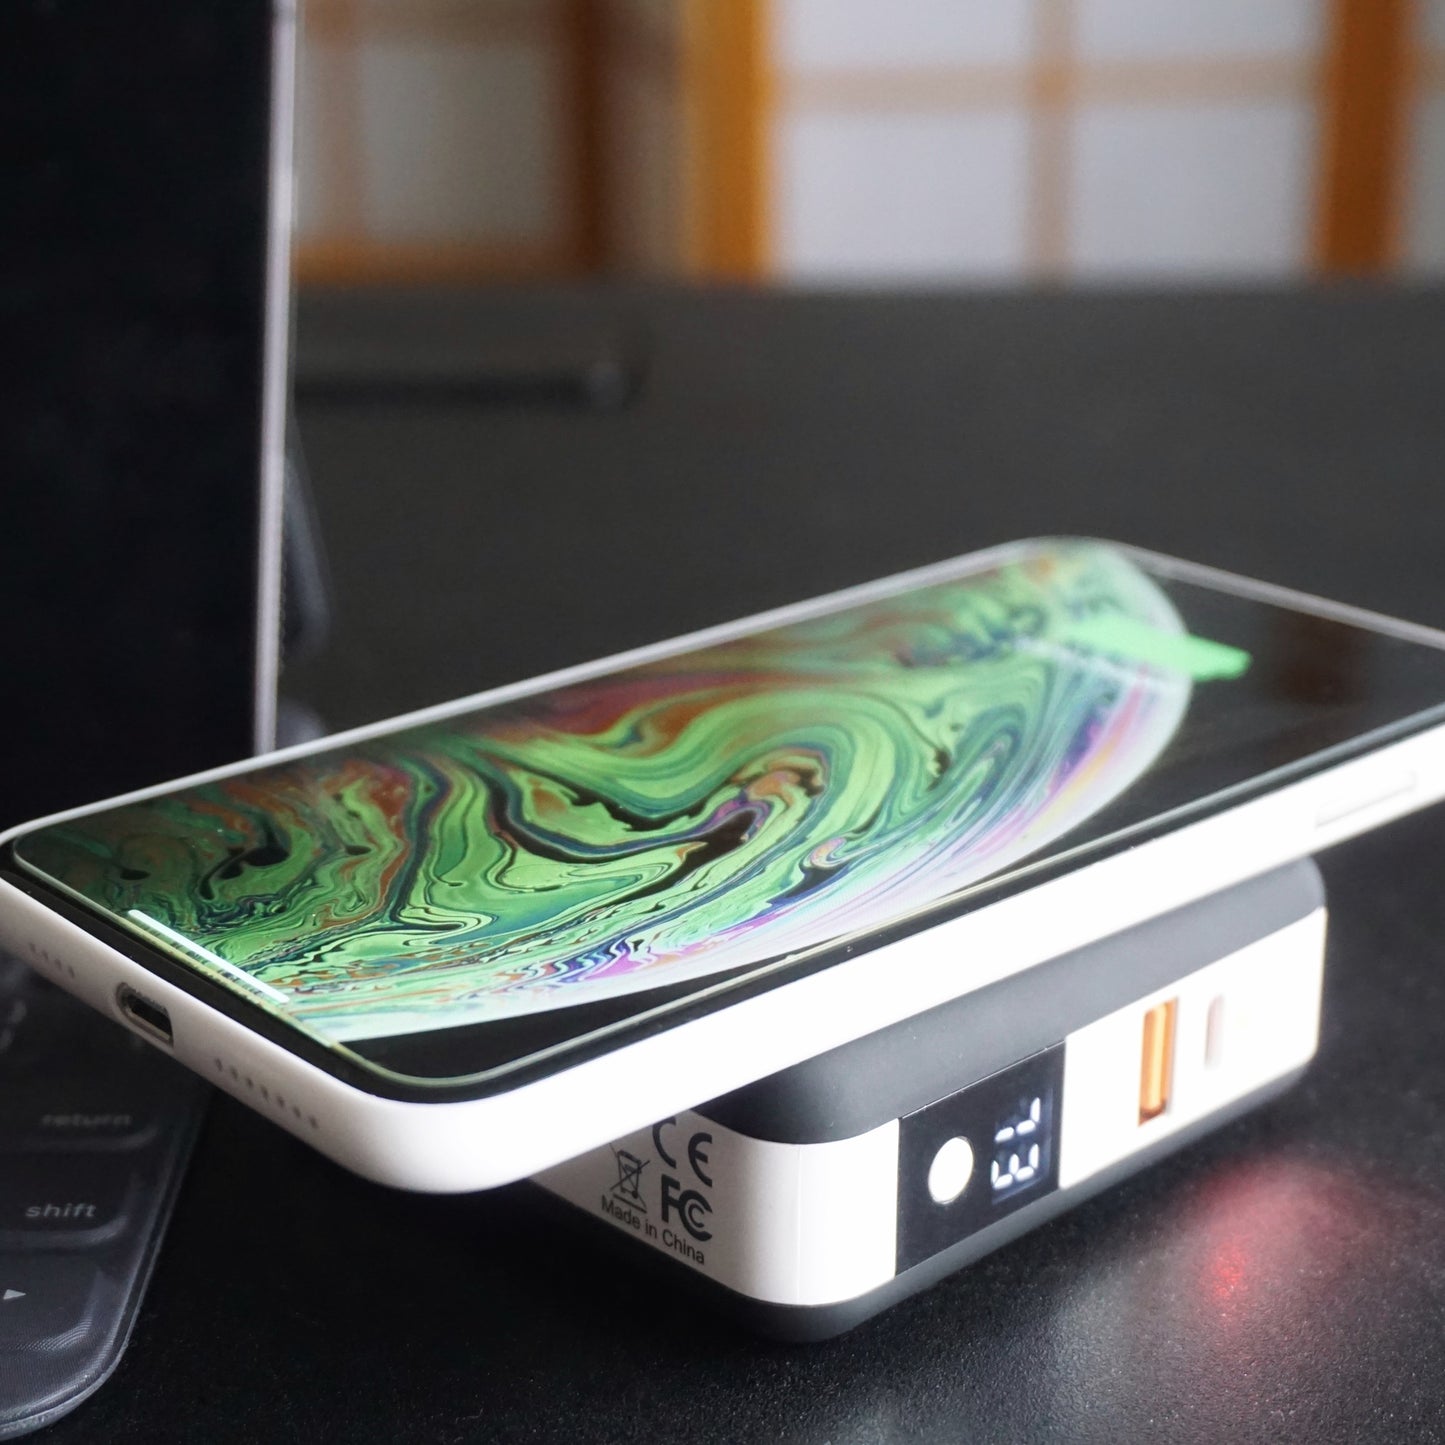 UNIVERSAL : All-In-One Travel Charger